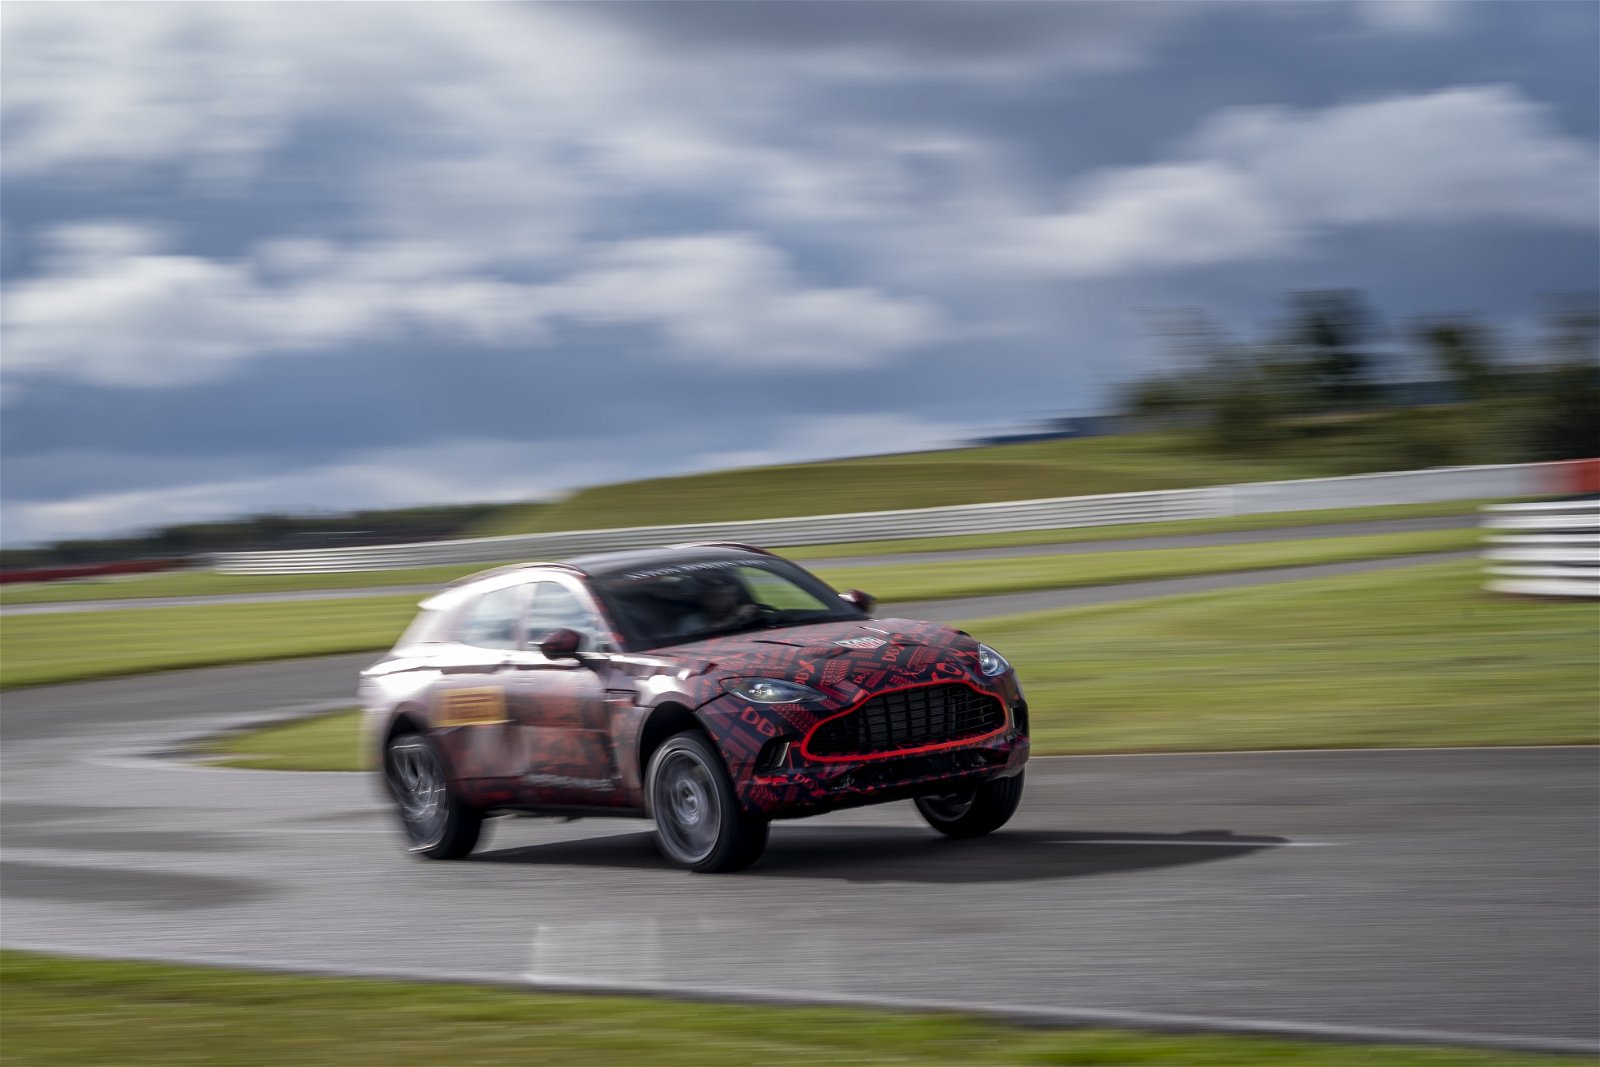 aston-martins-first-suv-powers-into-final-stages-of-development-01